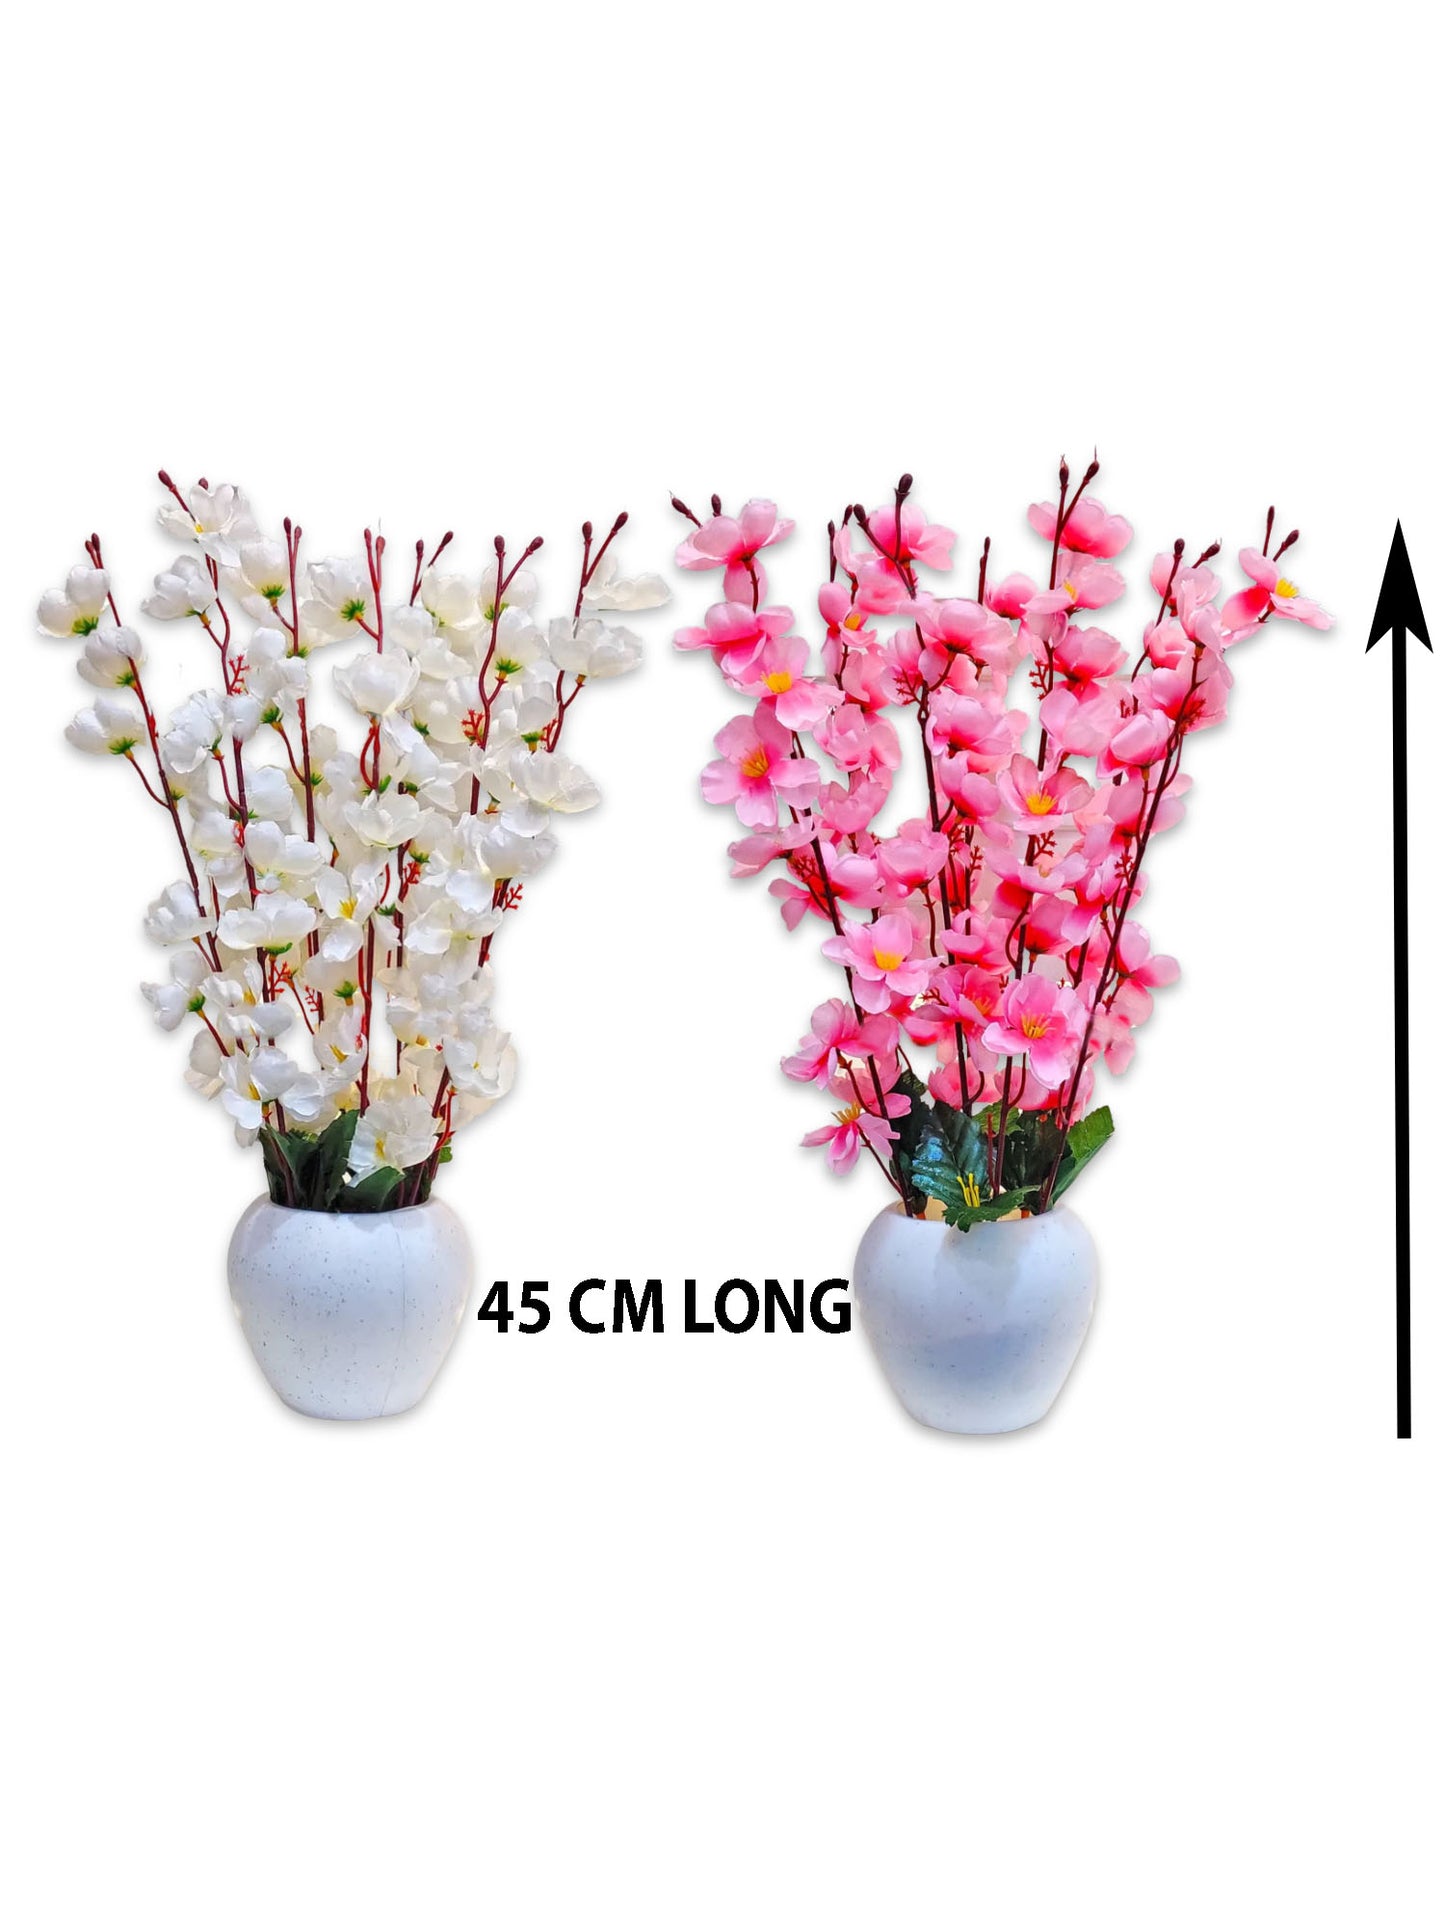 ARTSY® Artificial Flowers With Pot For Home Decoration, Office Decor Cherry Blossom combo, White, Light Pink, Pack of 2 Pieces.